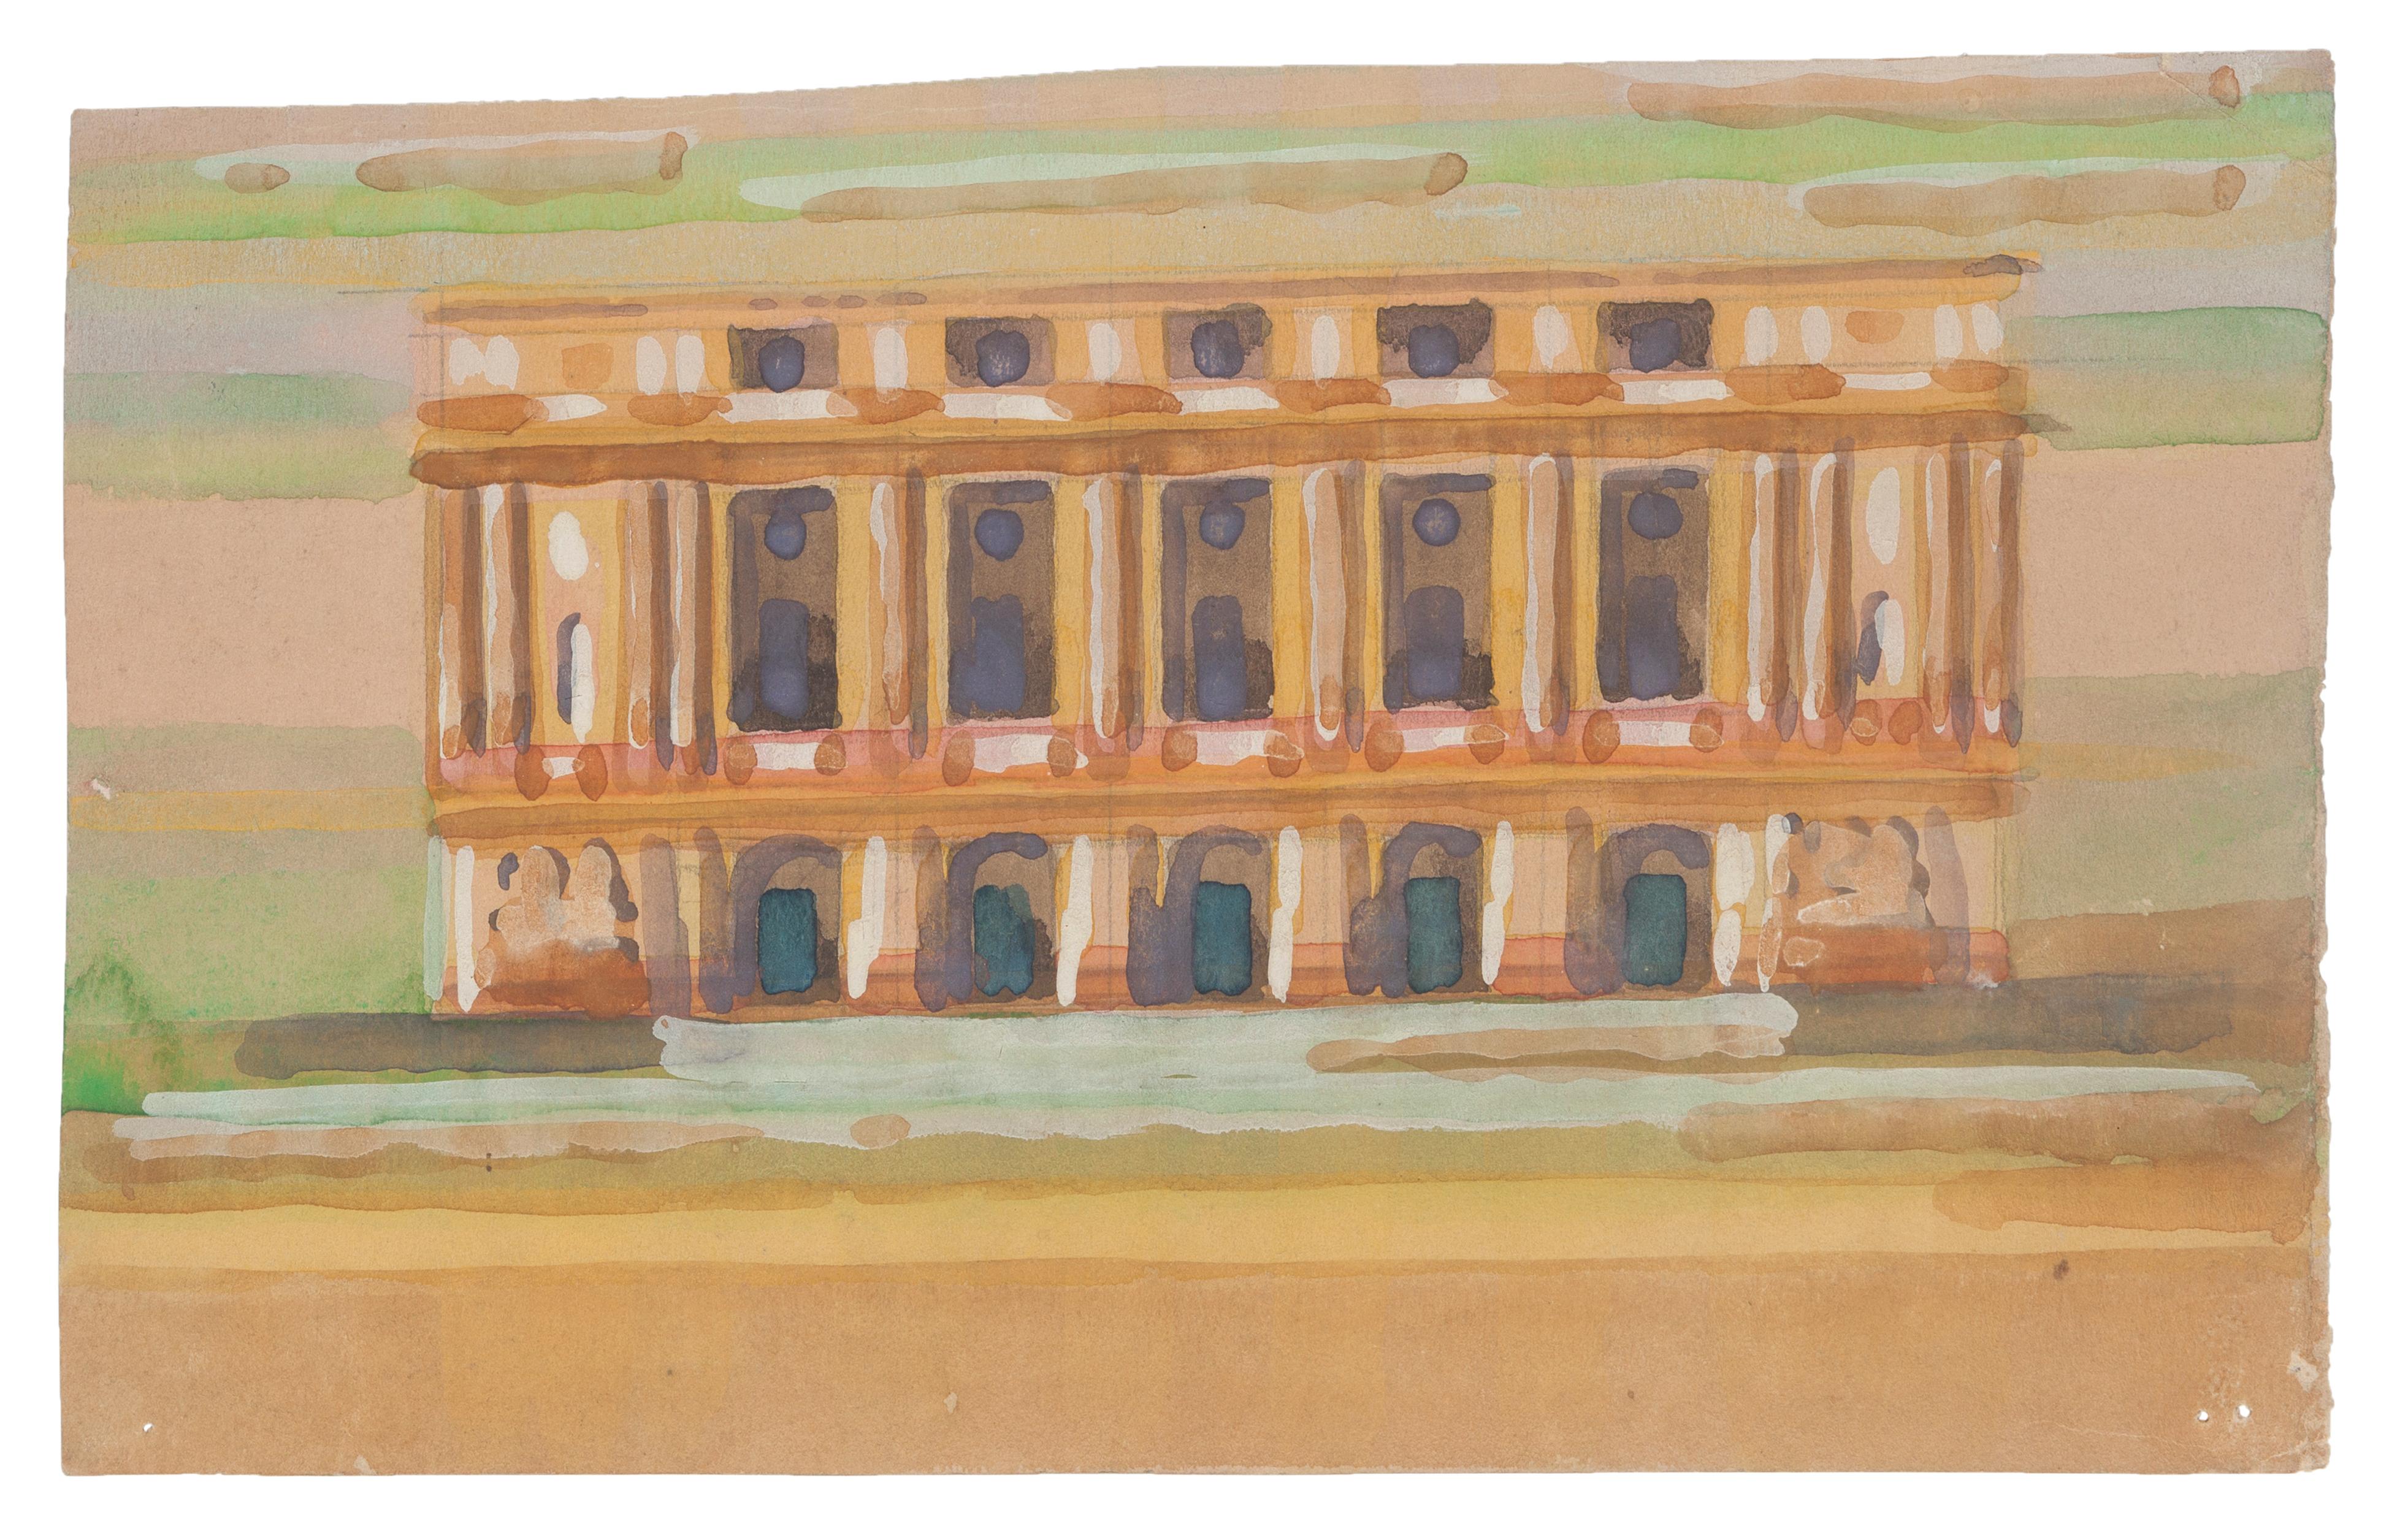 "Fantastic Building" is an original drawing in watercolor on paper, realized by Jean Delpech (1916-1988). 
The state of preservation of the artwork is very good.

Sheet dimension: 14 x 23 cm.

The artwork represents beautiful Fantastic Construction